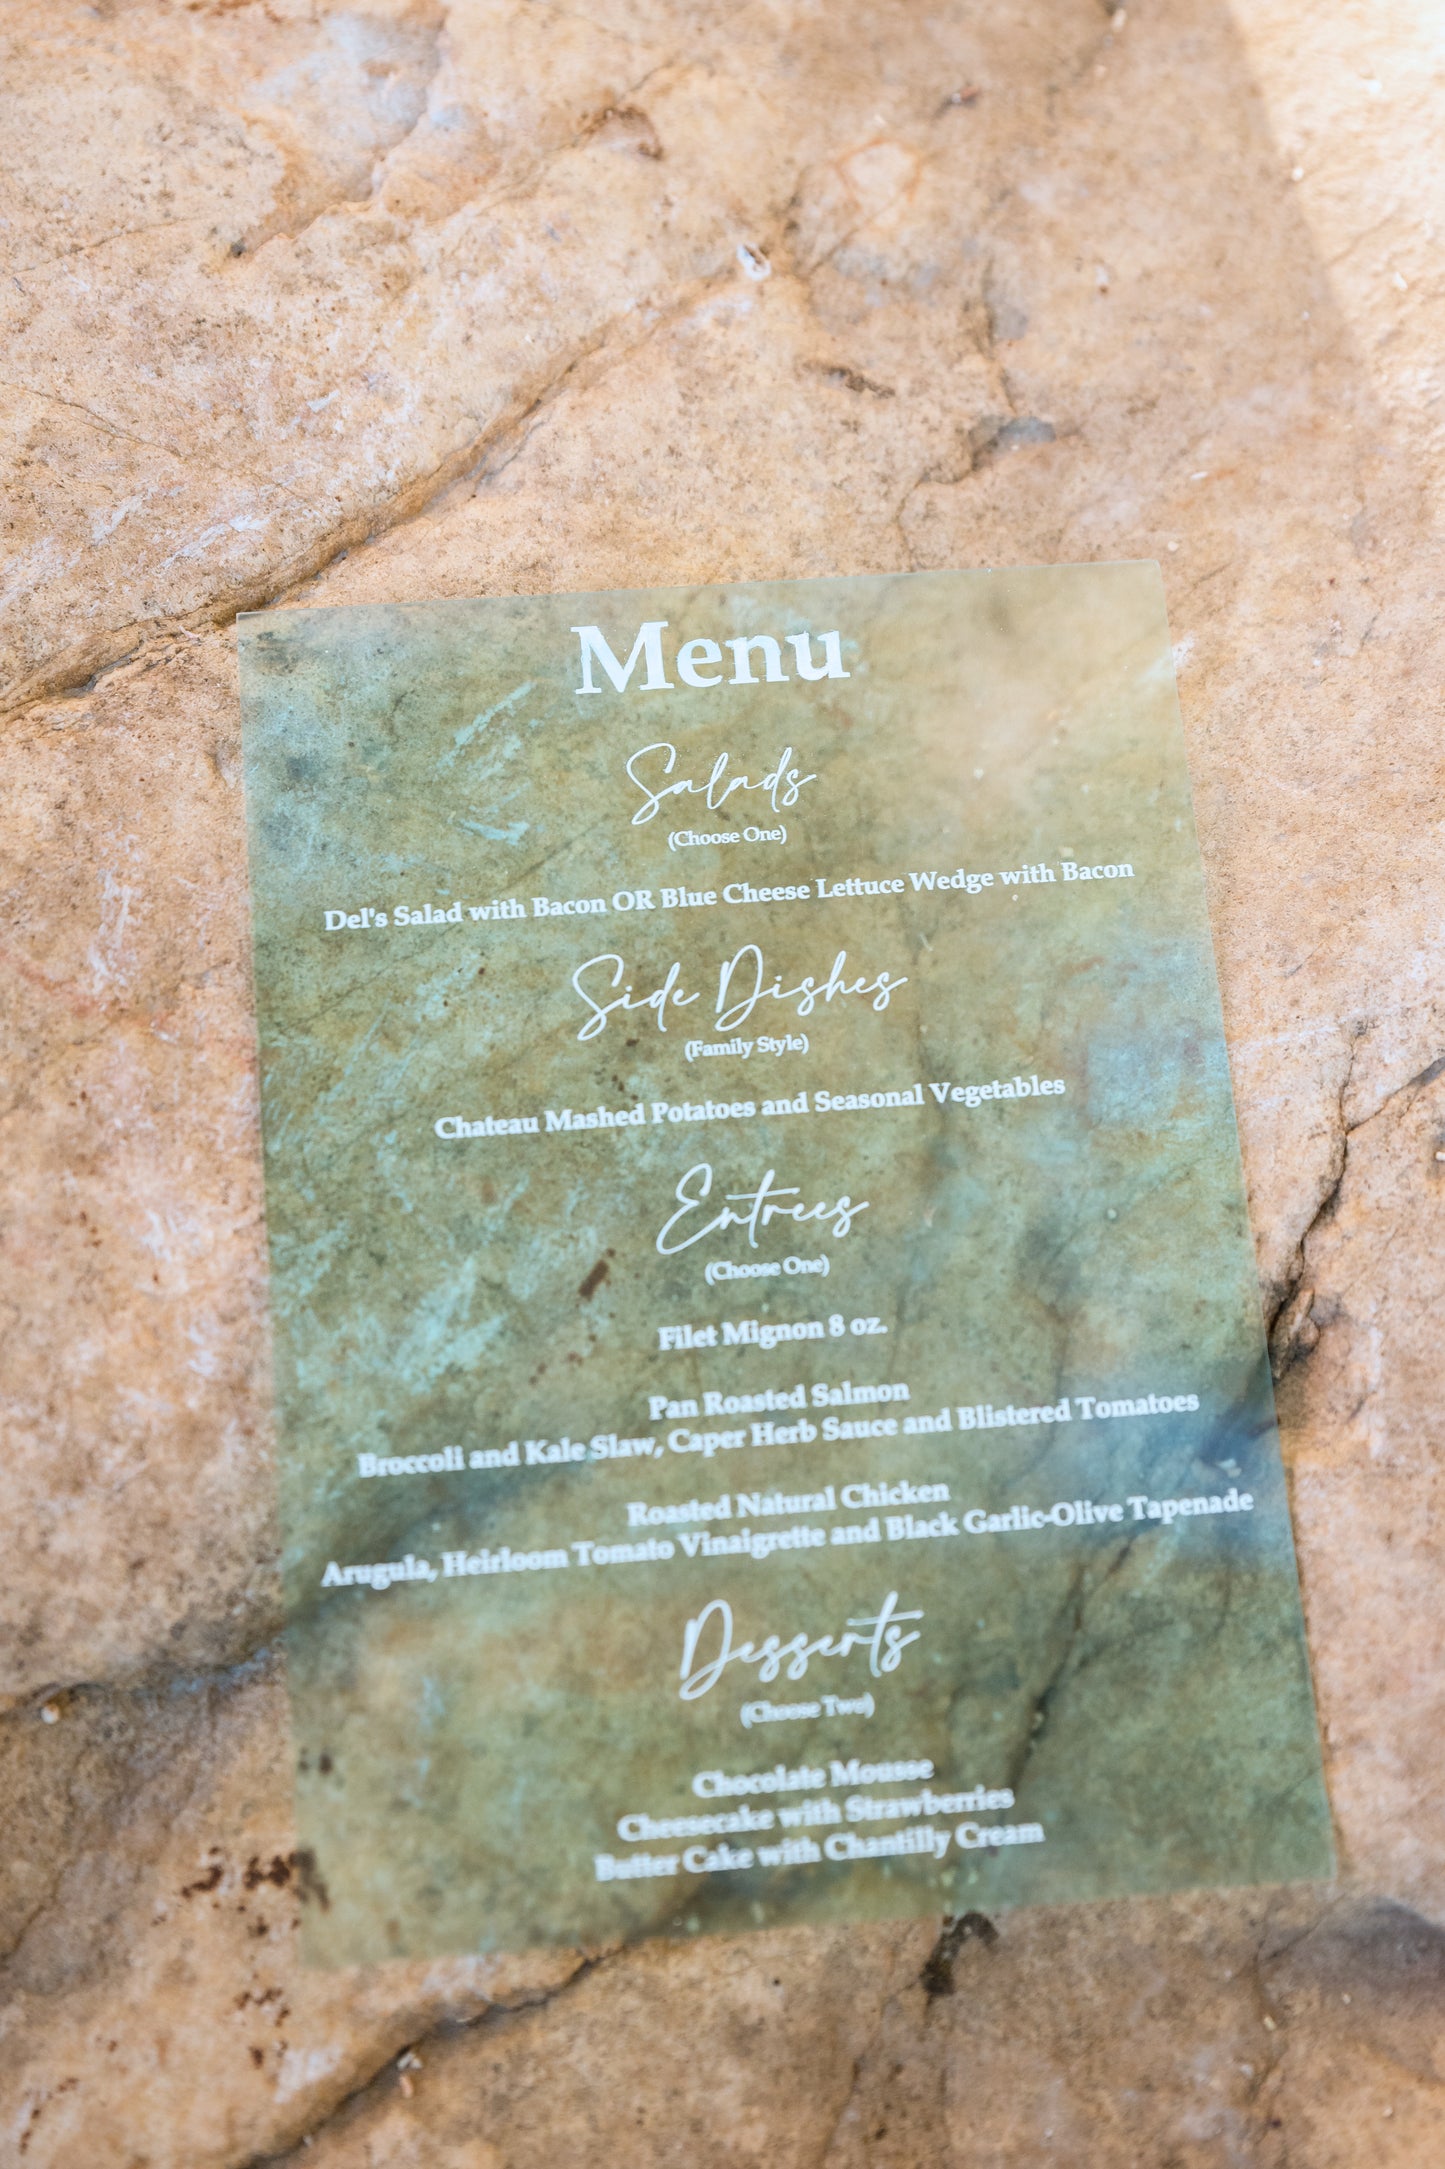 Personalized UV Printed Acrylic Menus for Events and Special Occasions